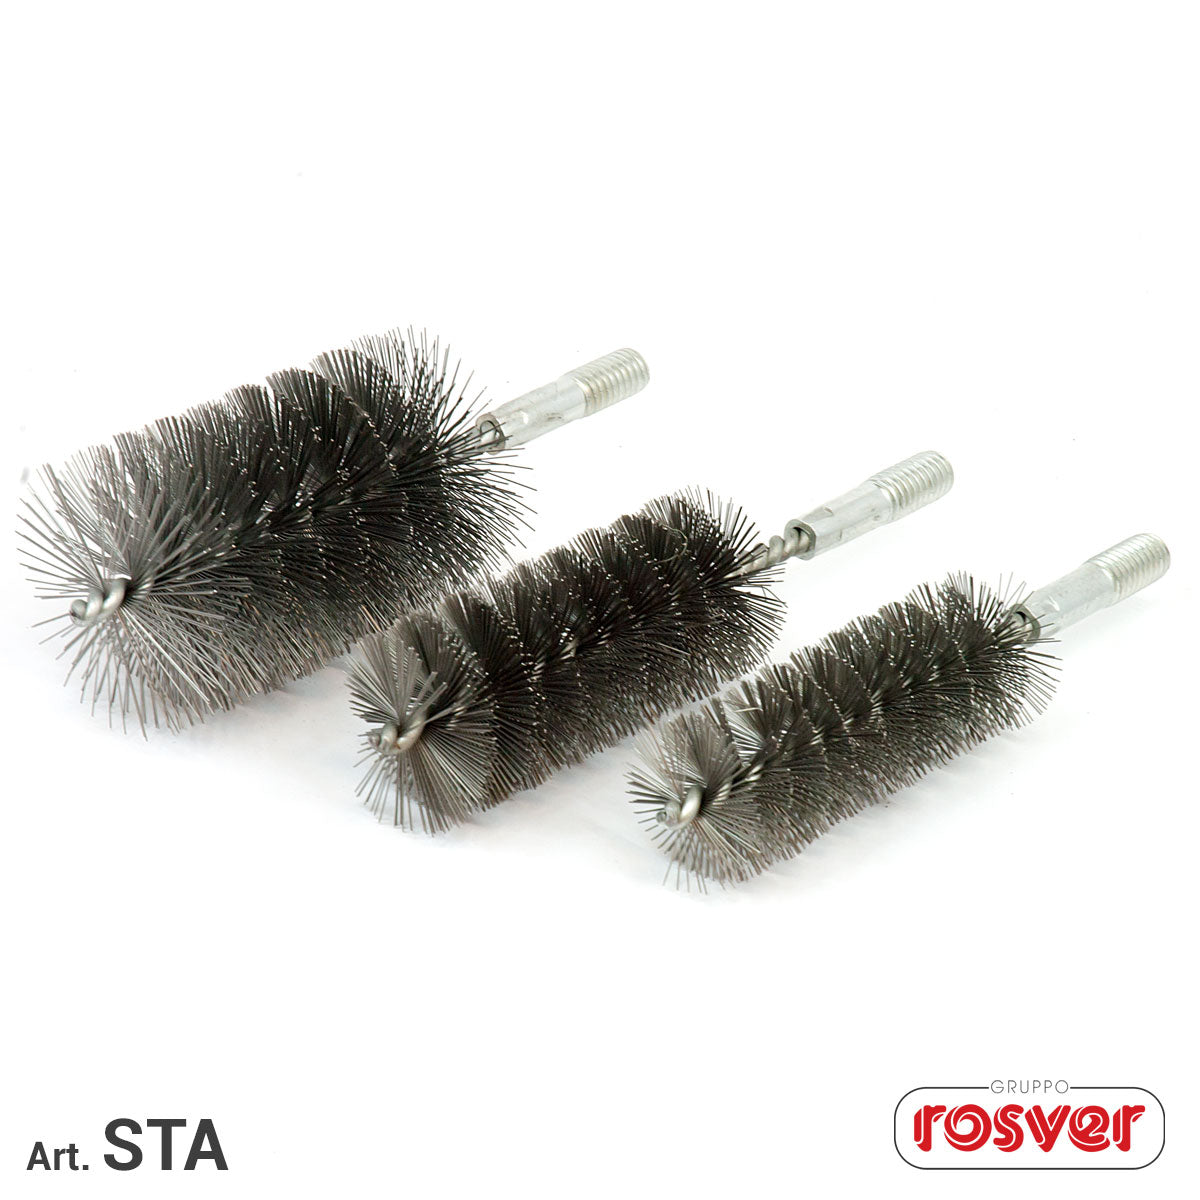 Steel Brushes with Thread Rosver - STA D.30x1/2" - Conf.10pz